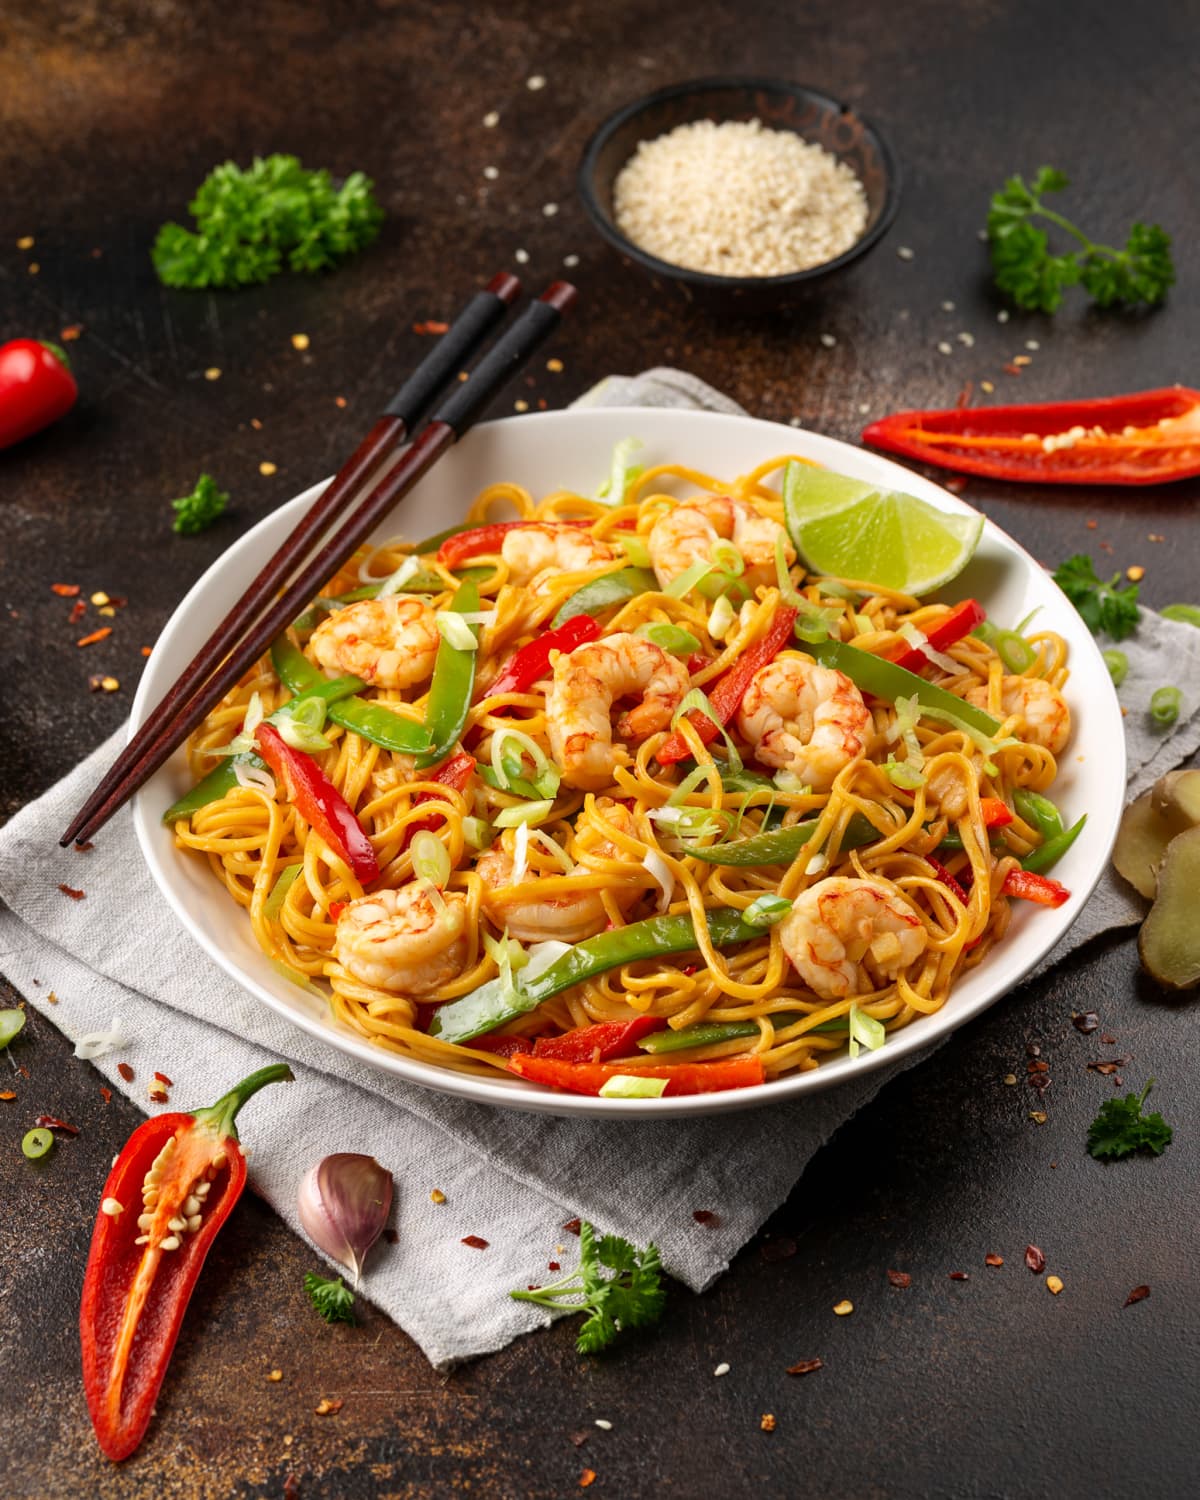 Stir fry noodles with prawns and vegetables on white plate with chopsticks